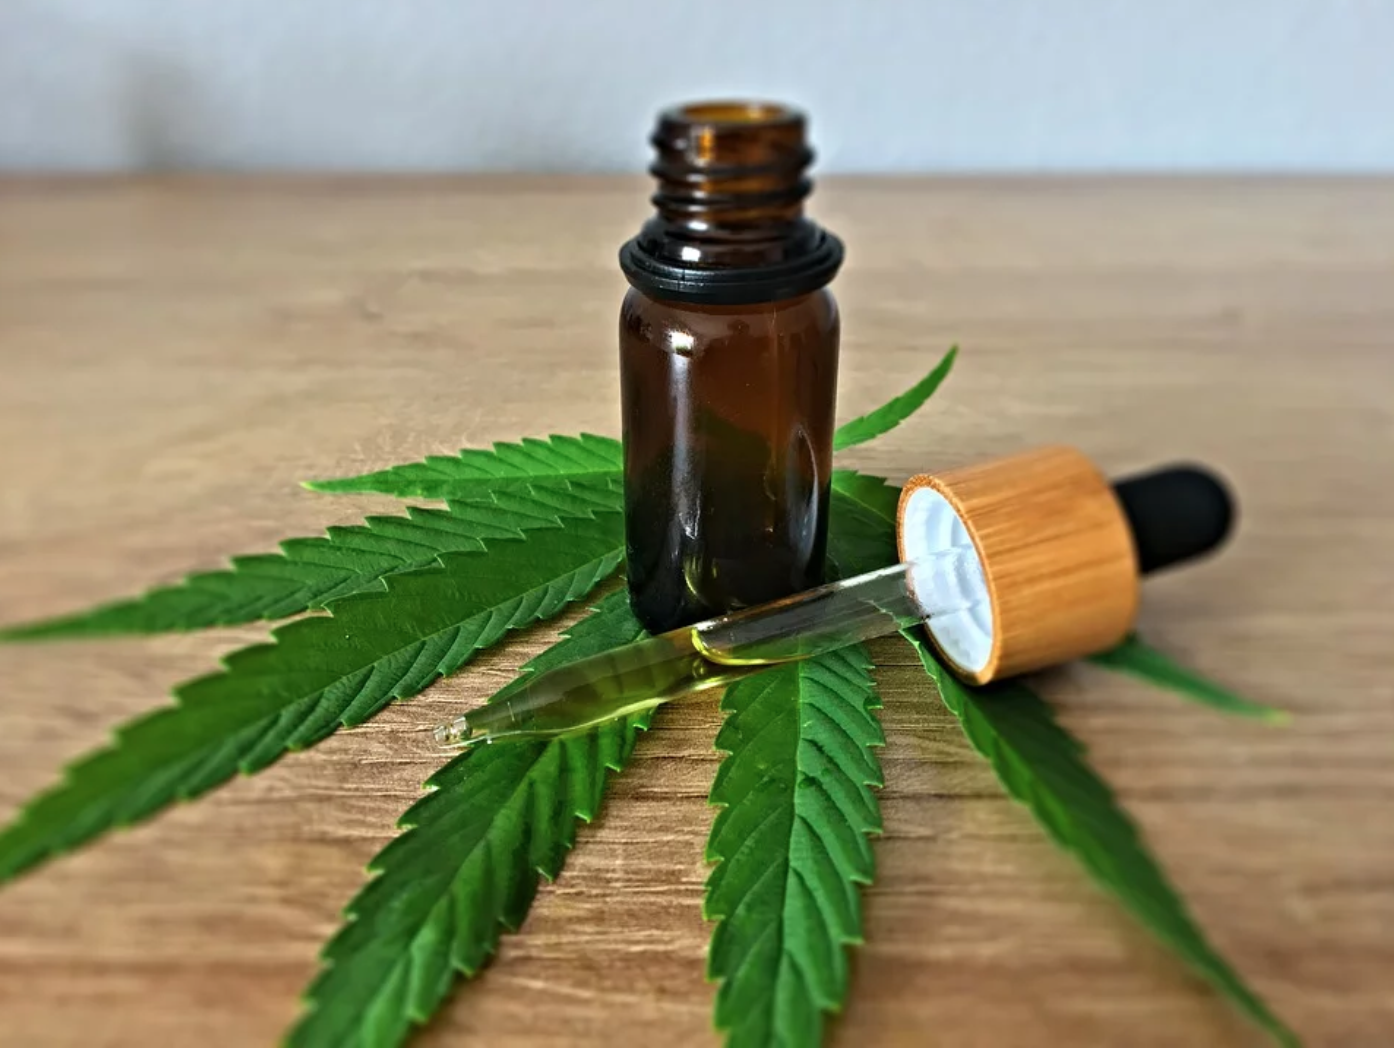 Marijuana leaf on wooden surface, with a brown bottle and eyedropper on the leaf; image by CBD-Infos-Com, via Pixabay.com.